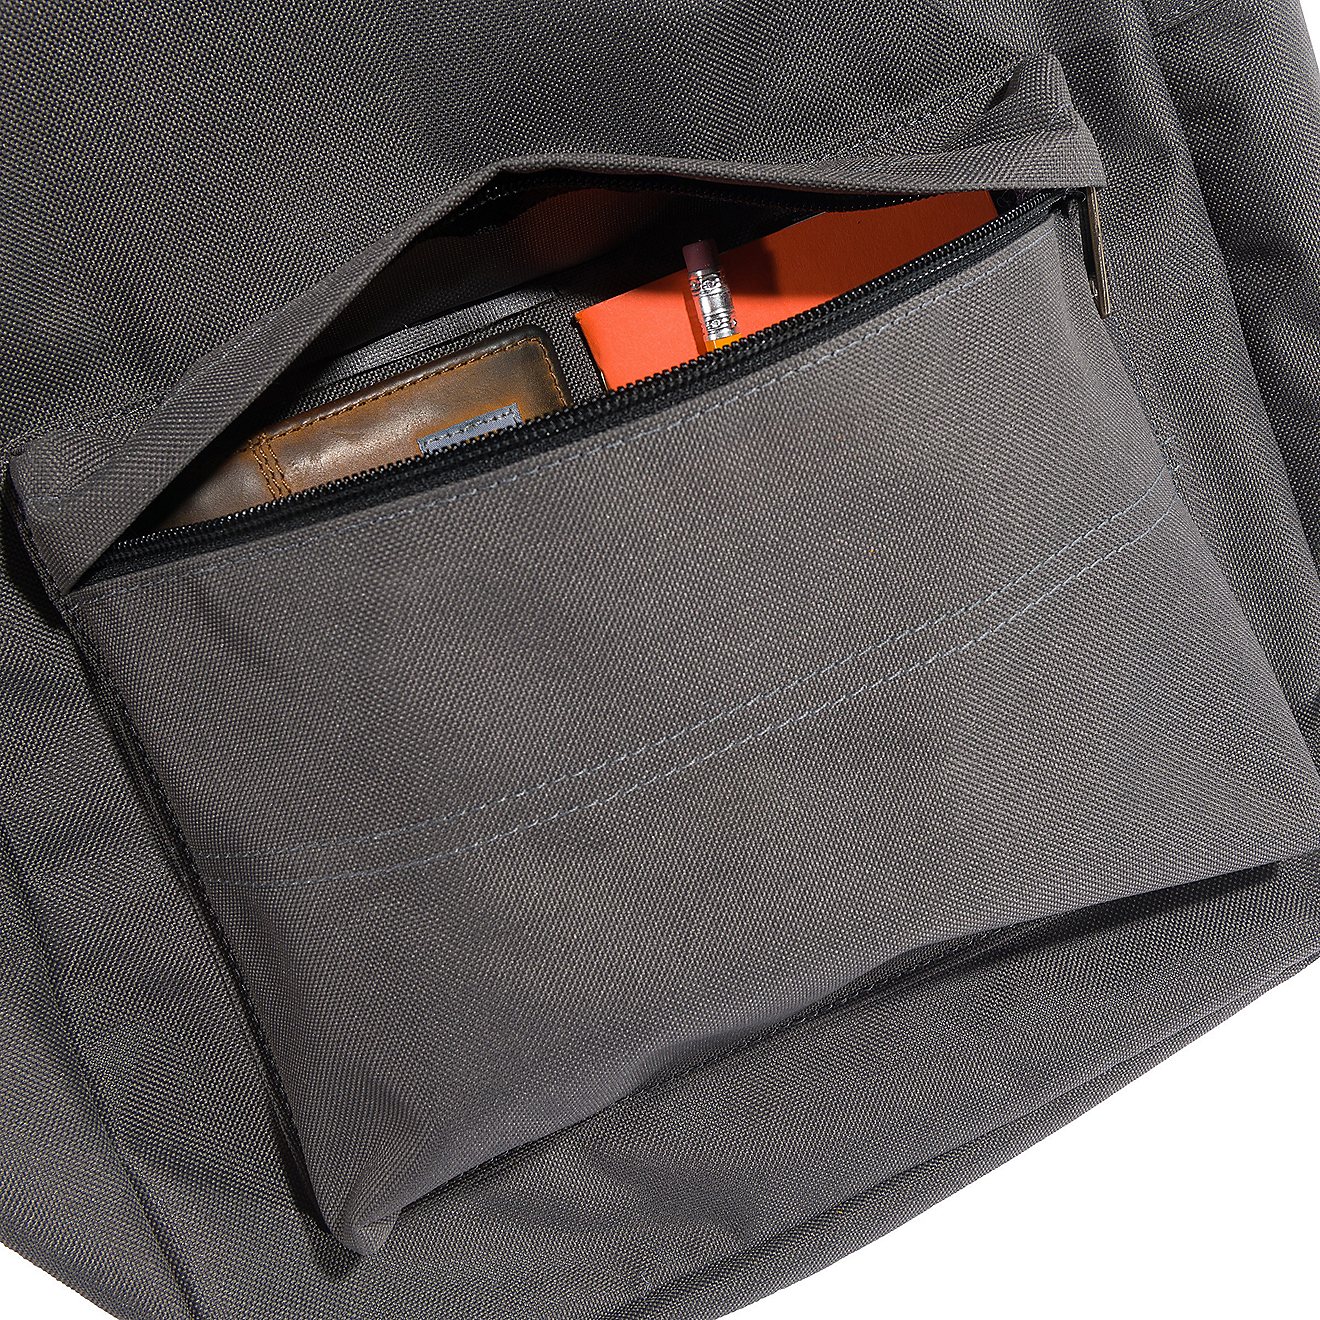 Carhartt Classic 21L Laptop Daypack                                                                                              - view number 5